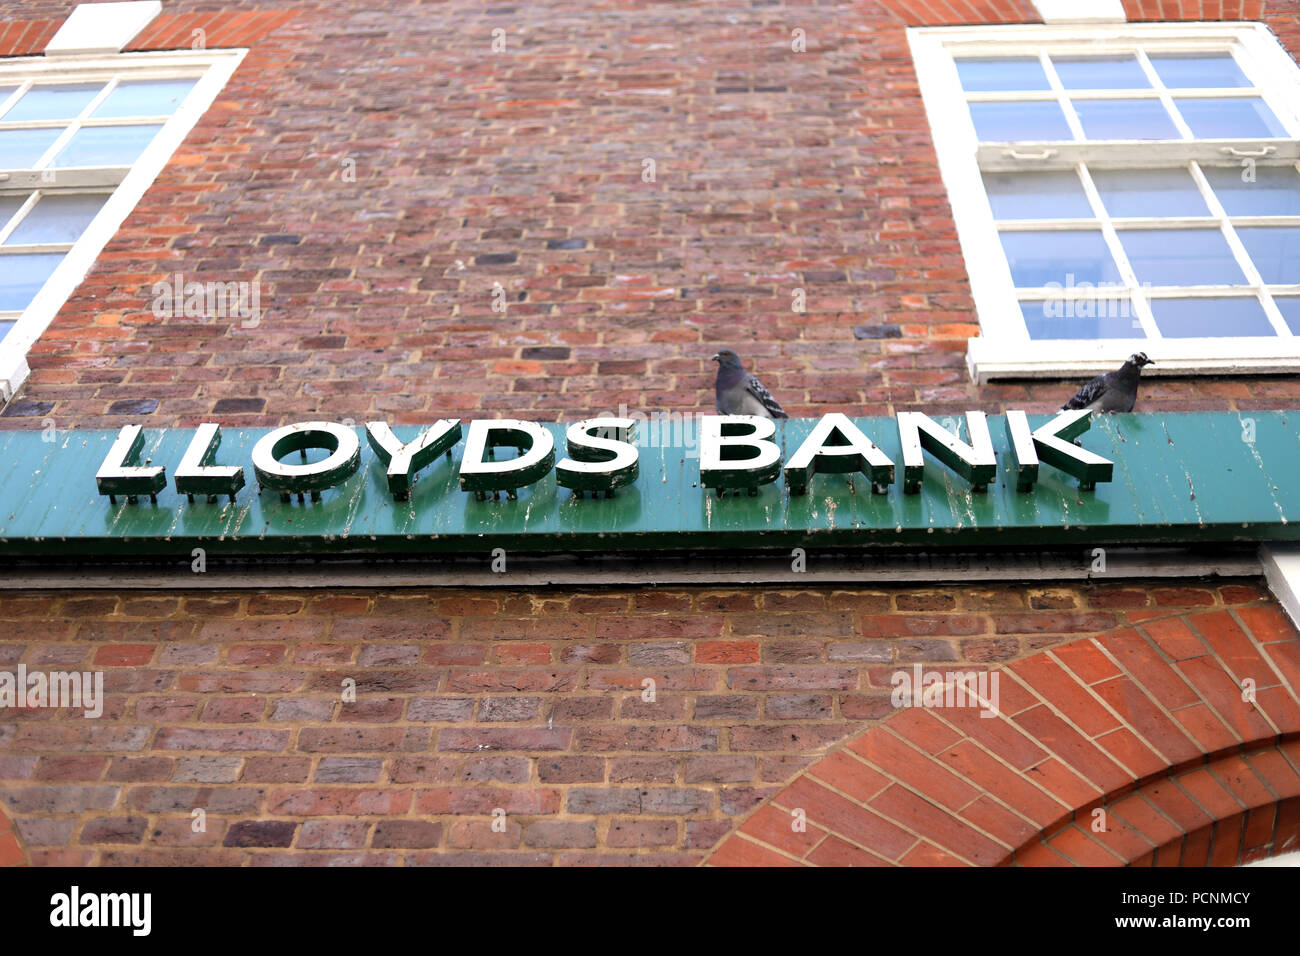 Lloyds Bank local branch in Muswell Hill Stock Photo